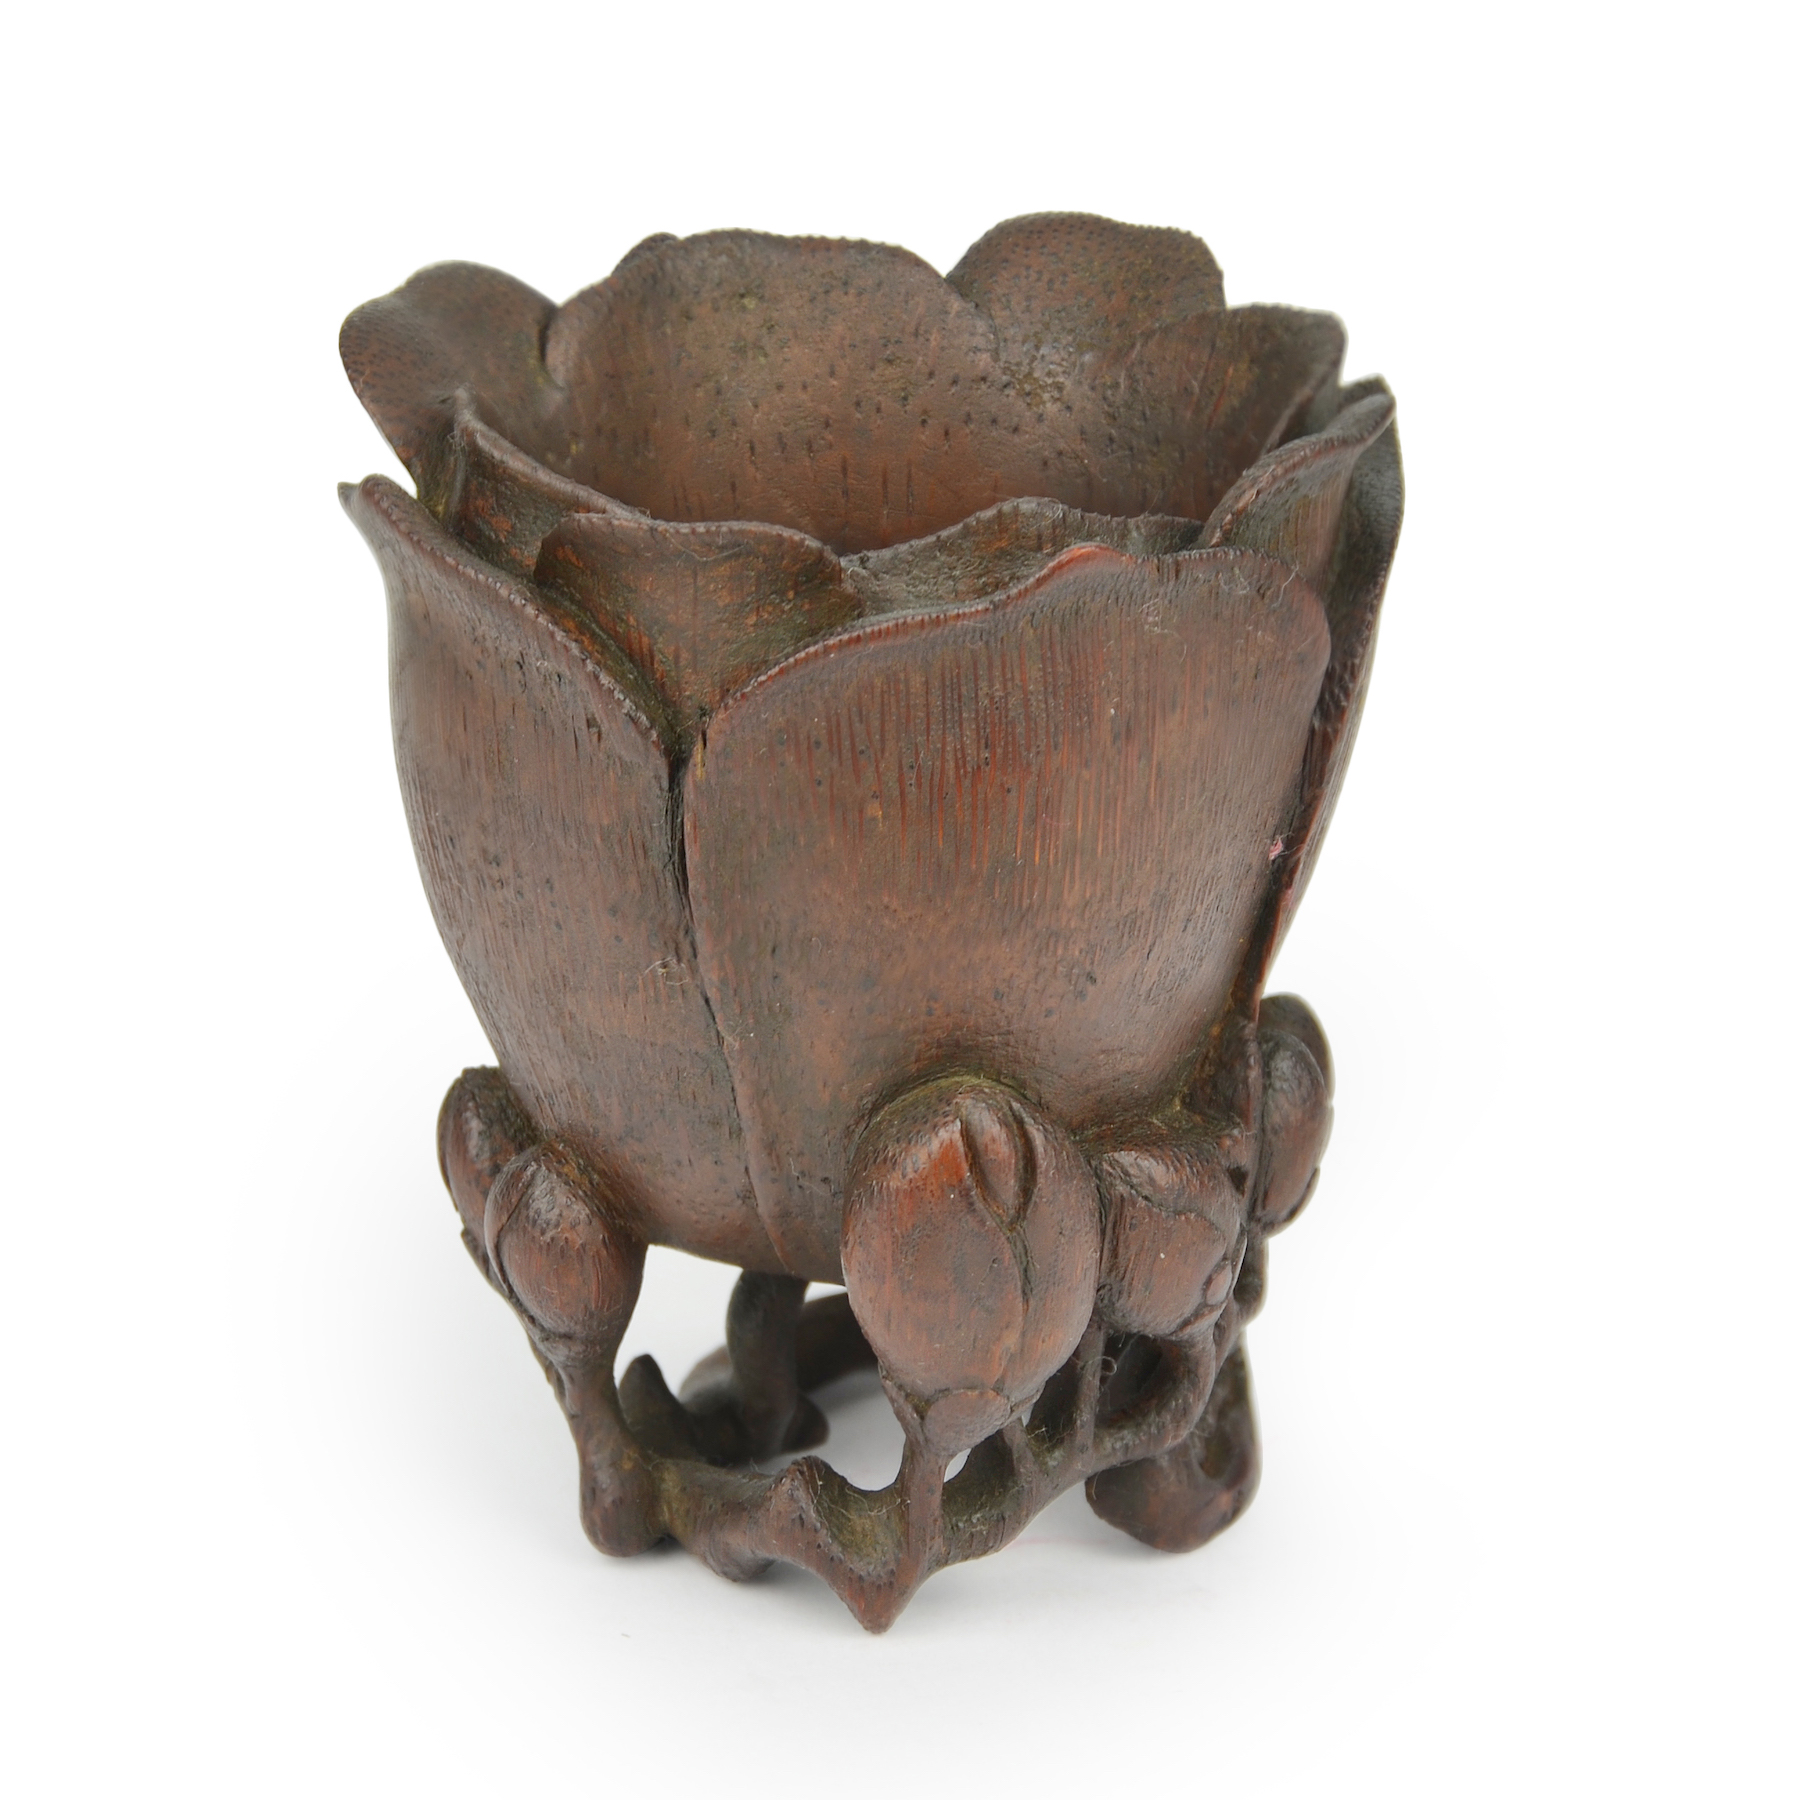 Root carved cup. Gianguan Auctions, June 17th, 2019.